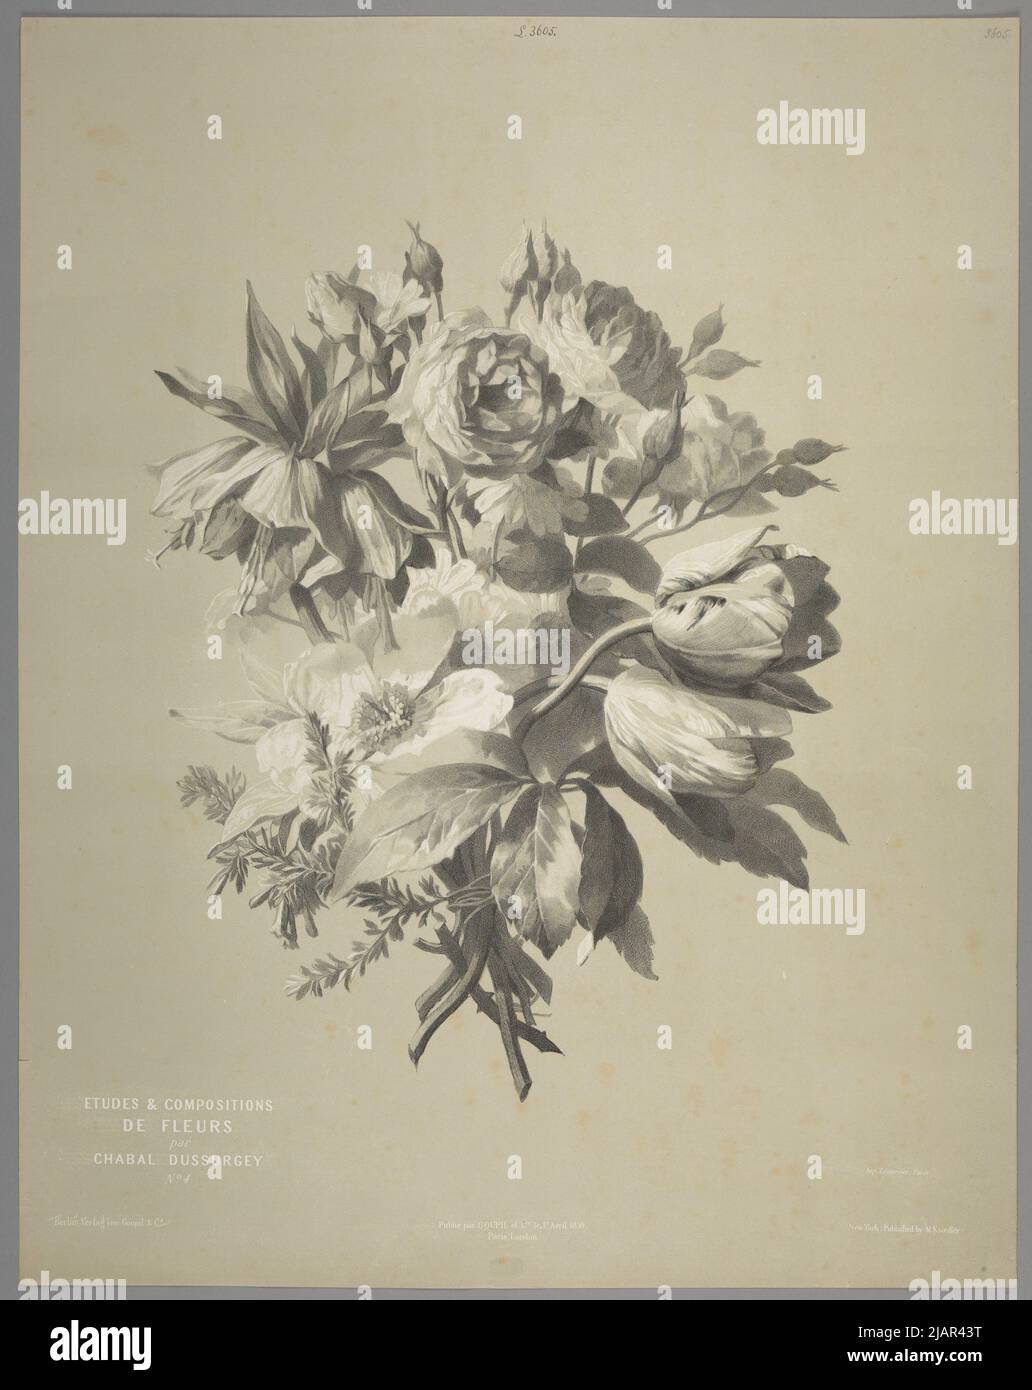 [Bouquet of Roses, Tulips and Imperial Crown]  Pl. 4. From the series Studies & Flowers compositions by Chabal Dussurgey, Paris London Berlin New York, 1859/1865, lit. Lemercier & Cie, ed. Goupil & Cie Chabal Dussurgey, Pierre Adrien (1819 1902), W A C. Pierre Adrien Chabal, imp. Lemercier & Cie, Goupil & Cie, Knoedler, Michael (1823 1878) Stock Photo